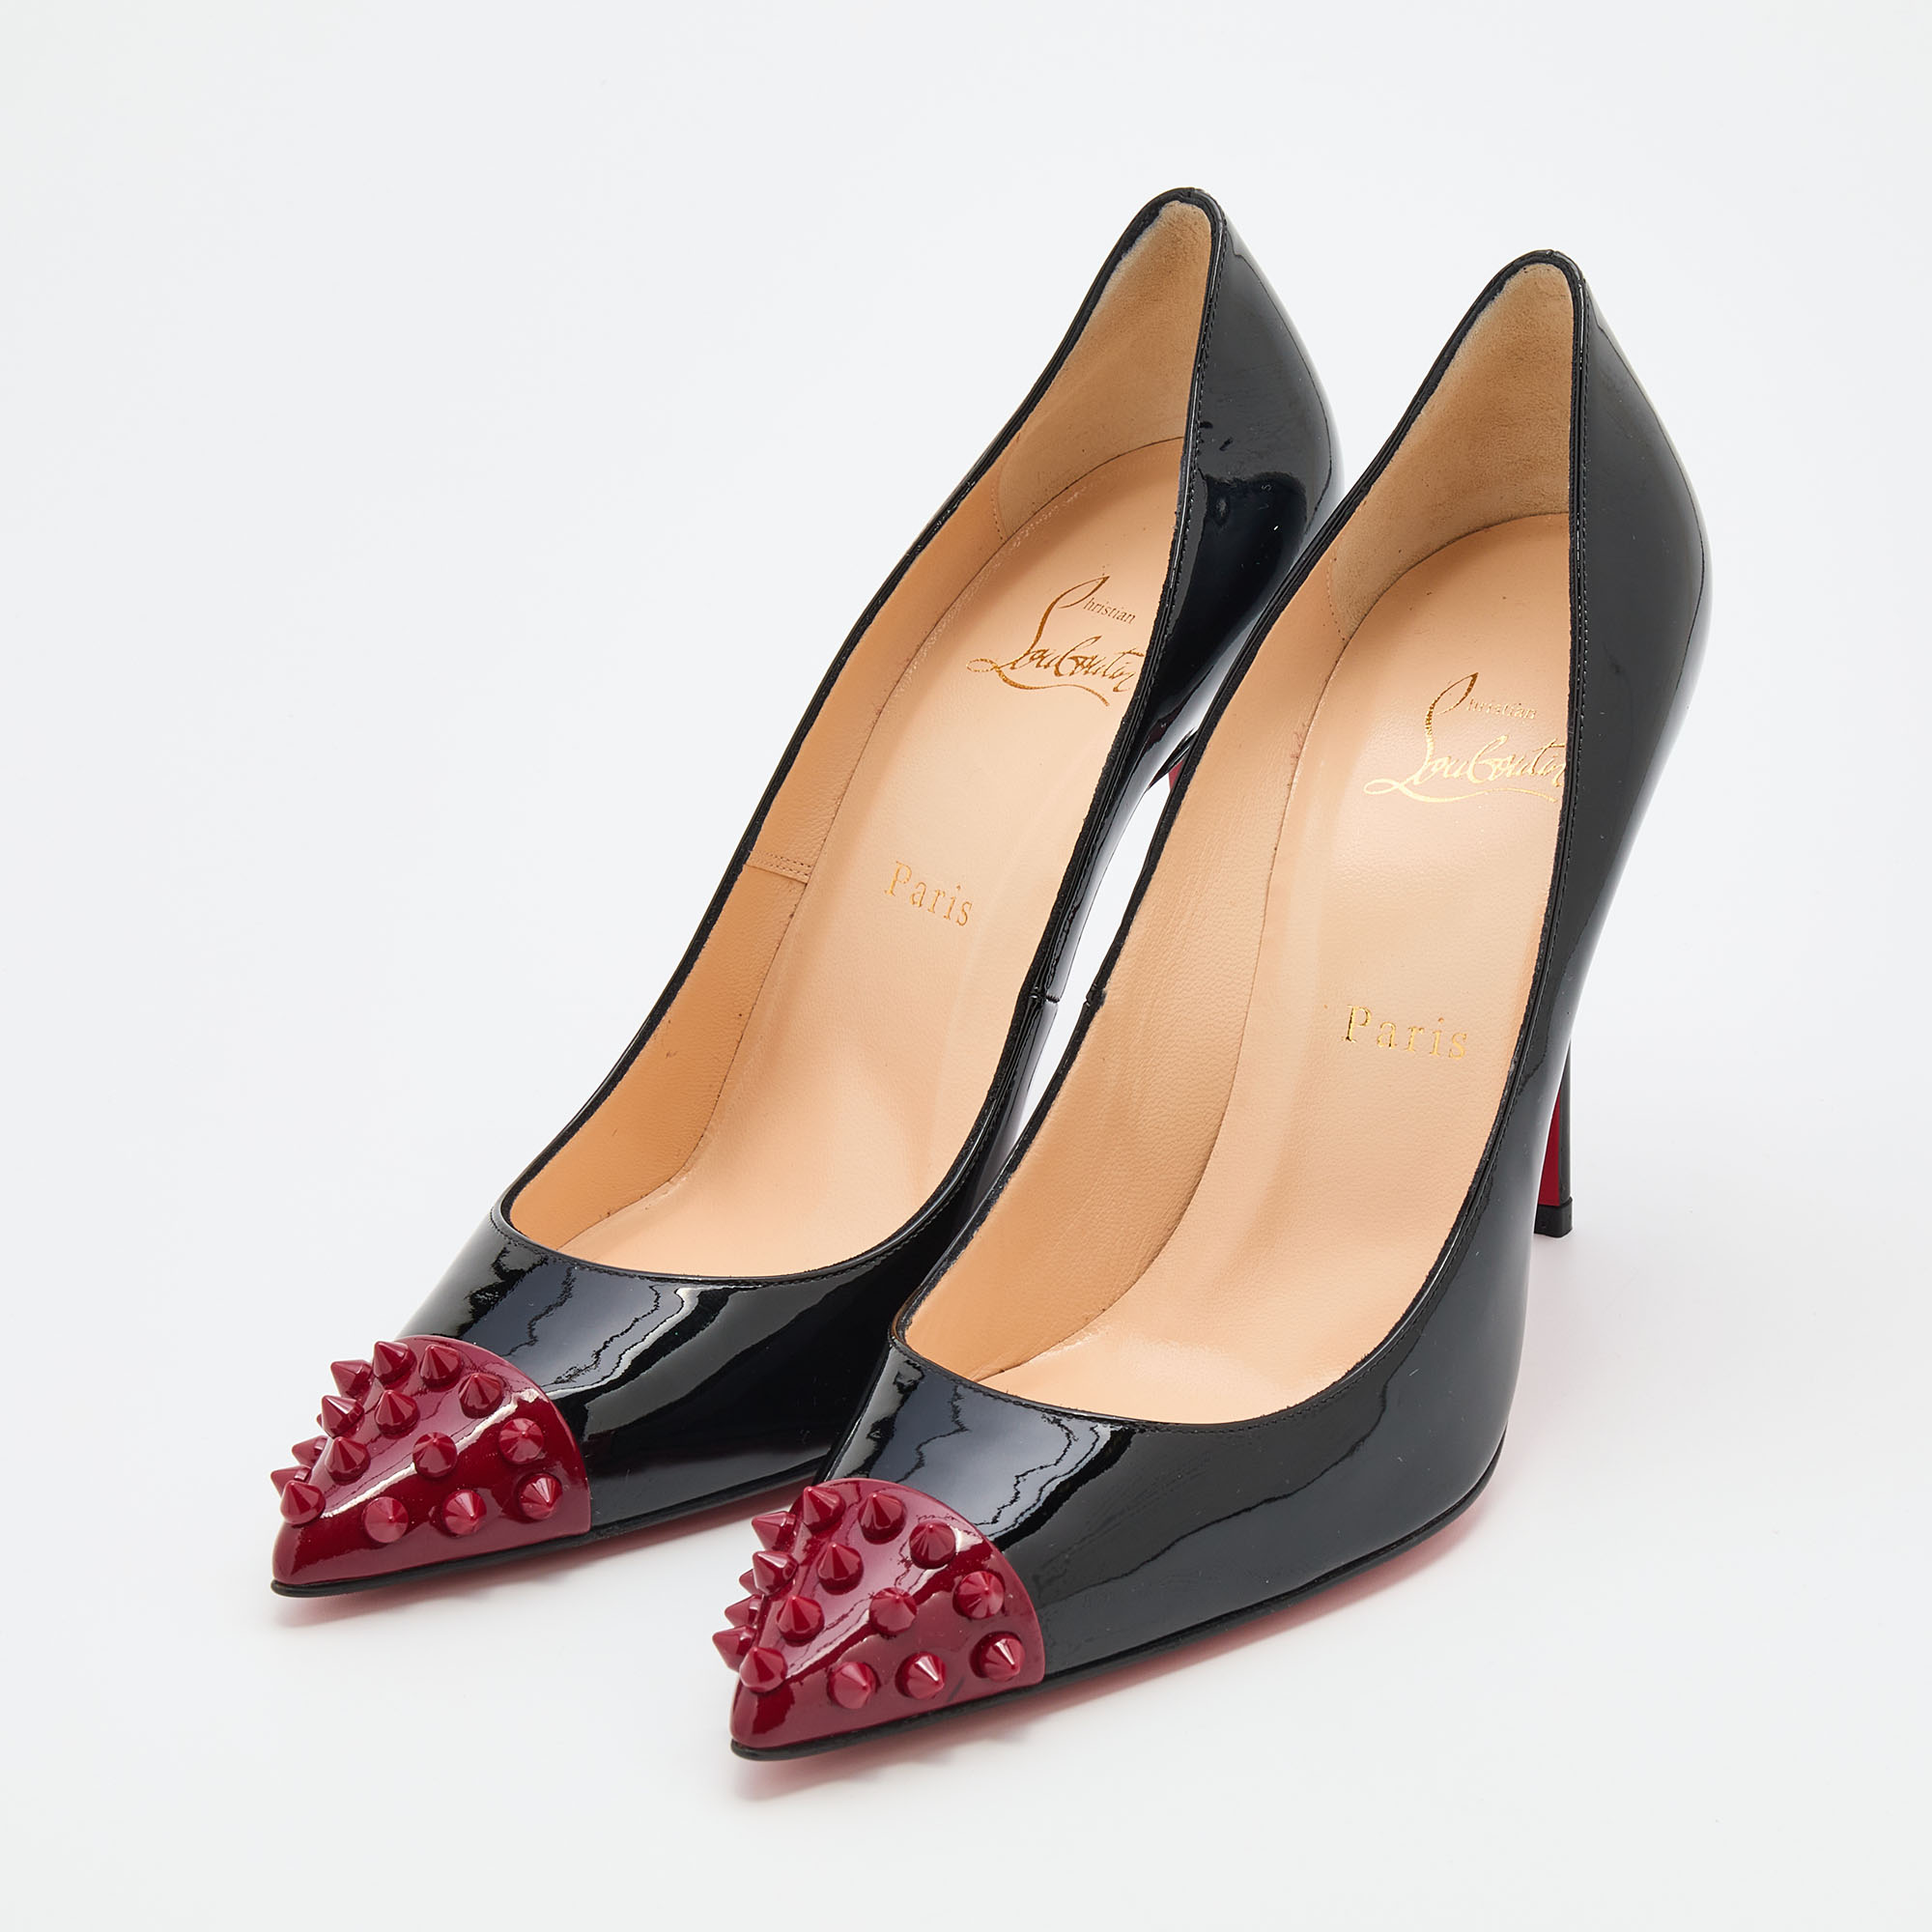 

Christian Louboutin Black/Red Patent Leather Geo Spiked Cap Toe Pumps Size